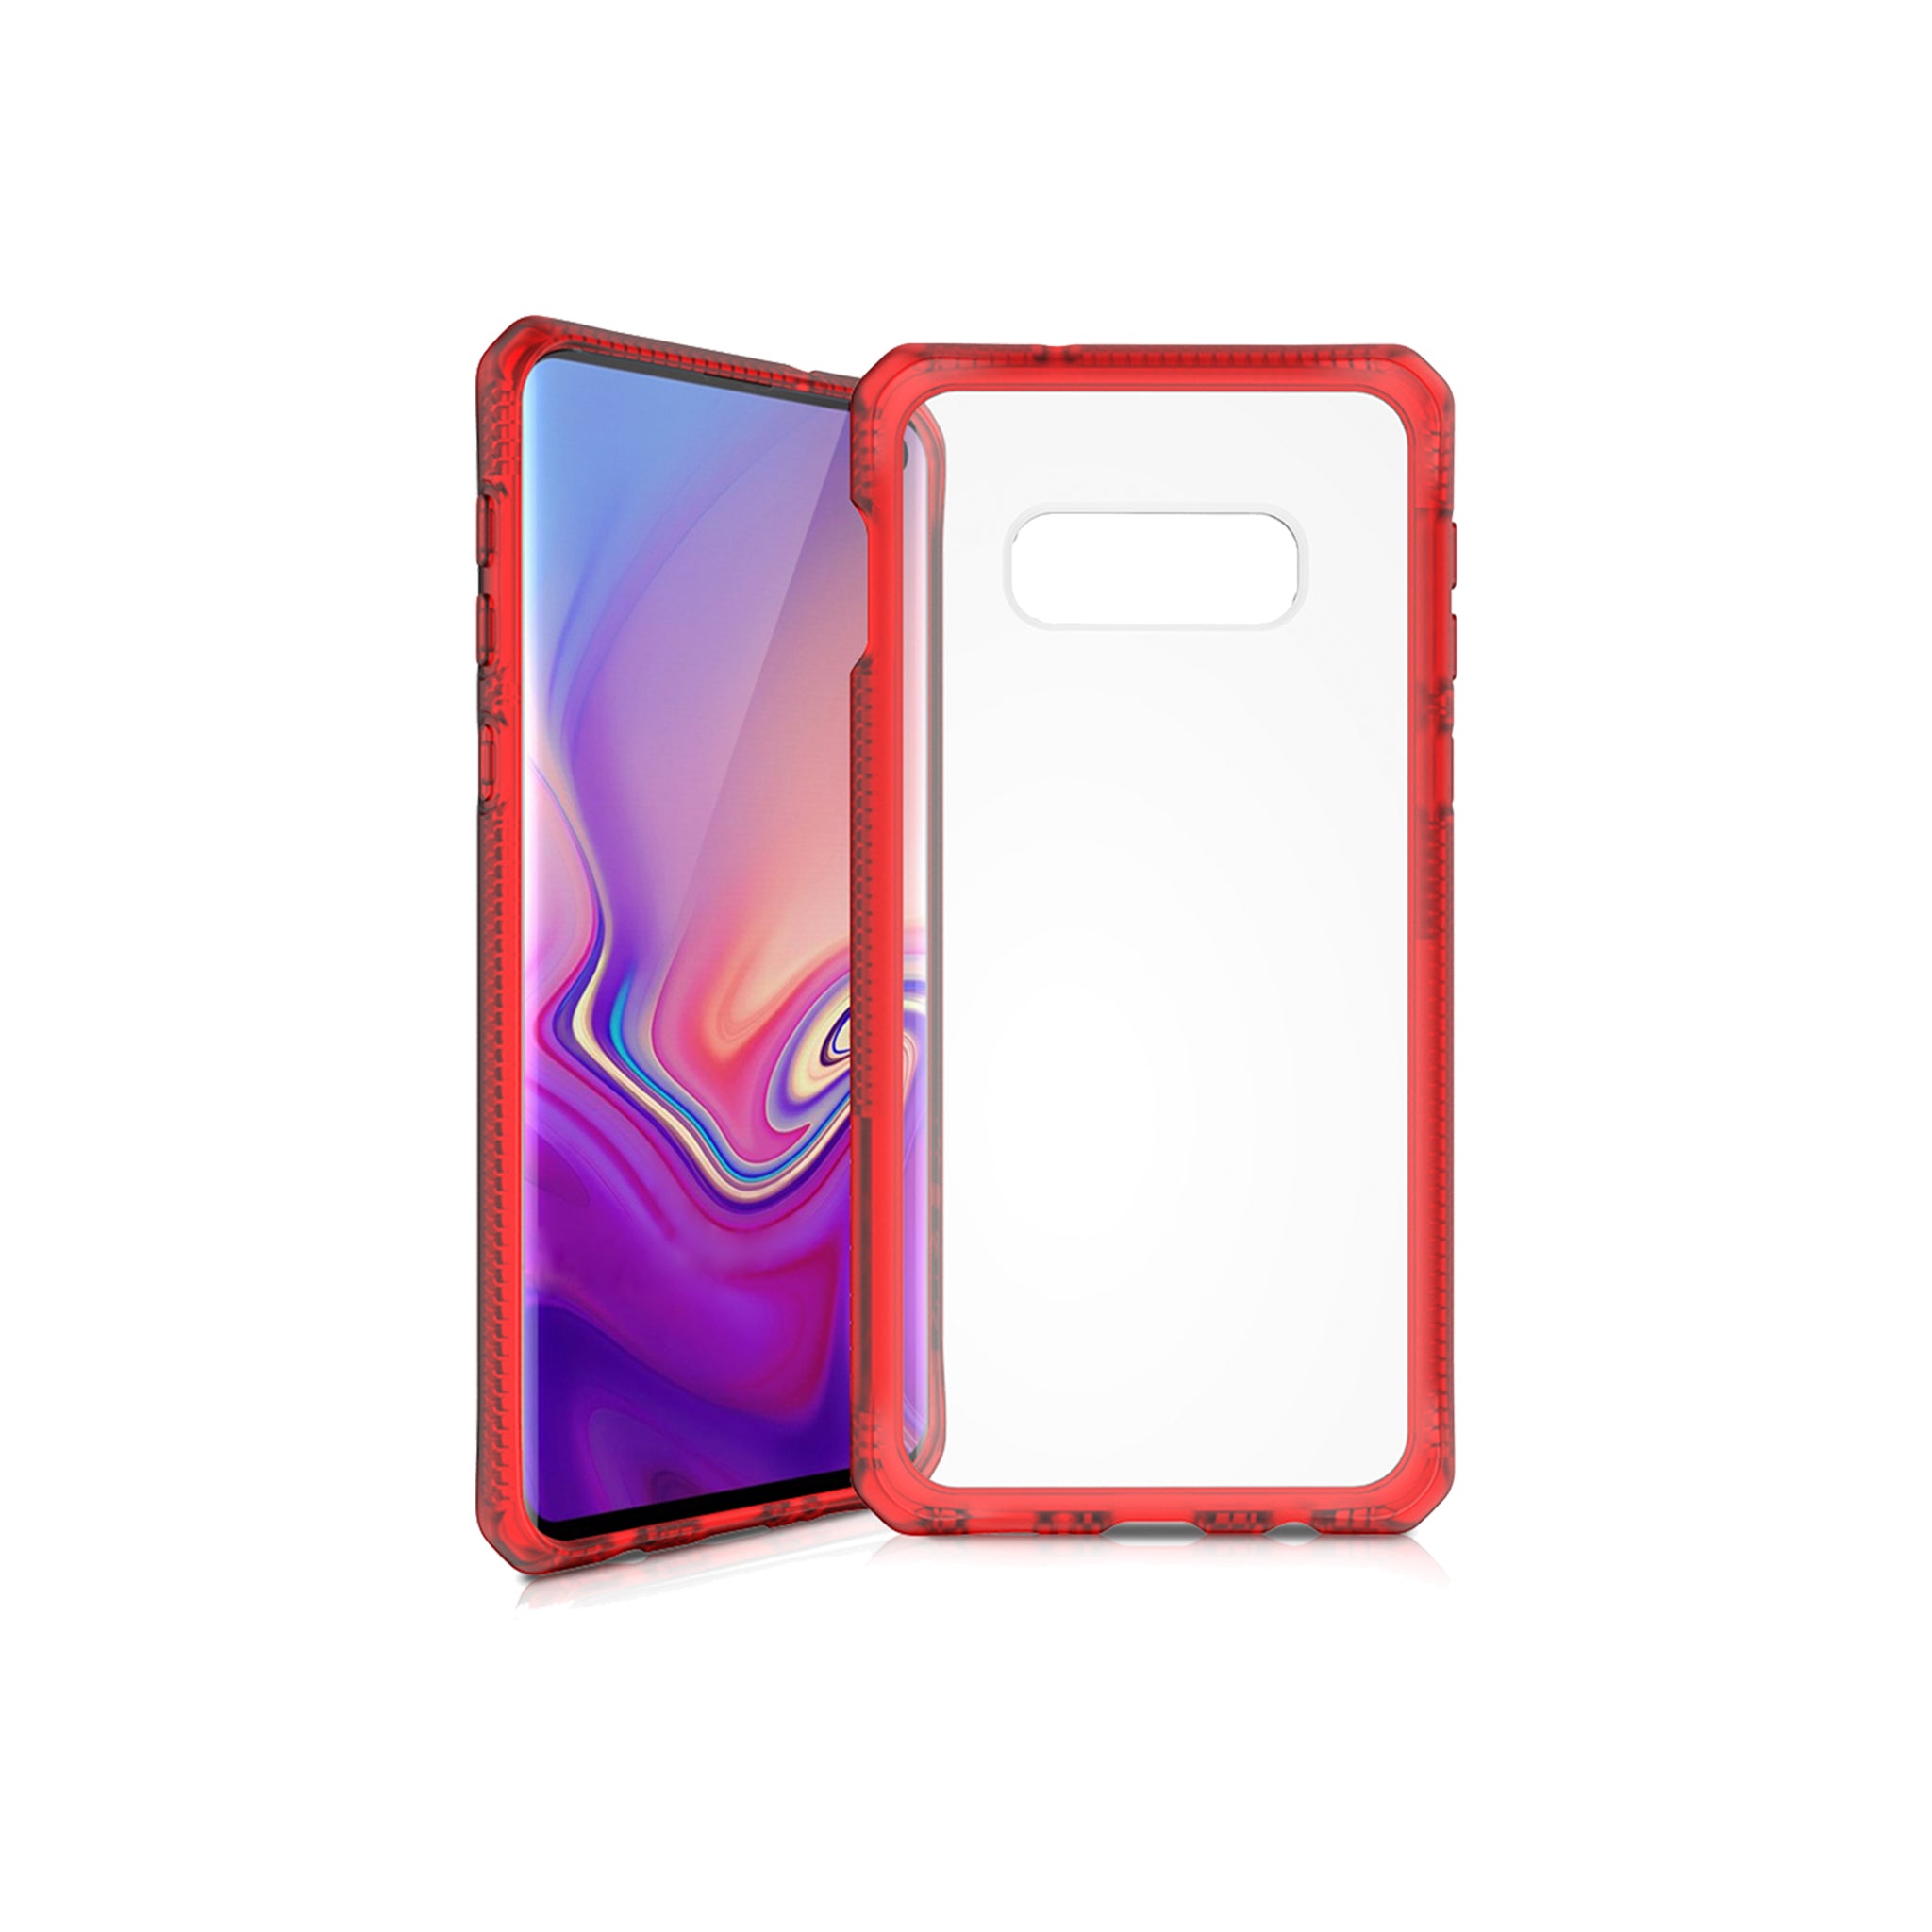 Itskins - Hybrid Frost Mkii Case For Samsung Galaxy S10e - Red And Transparent